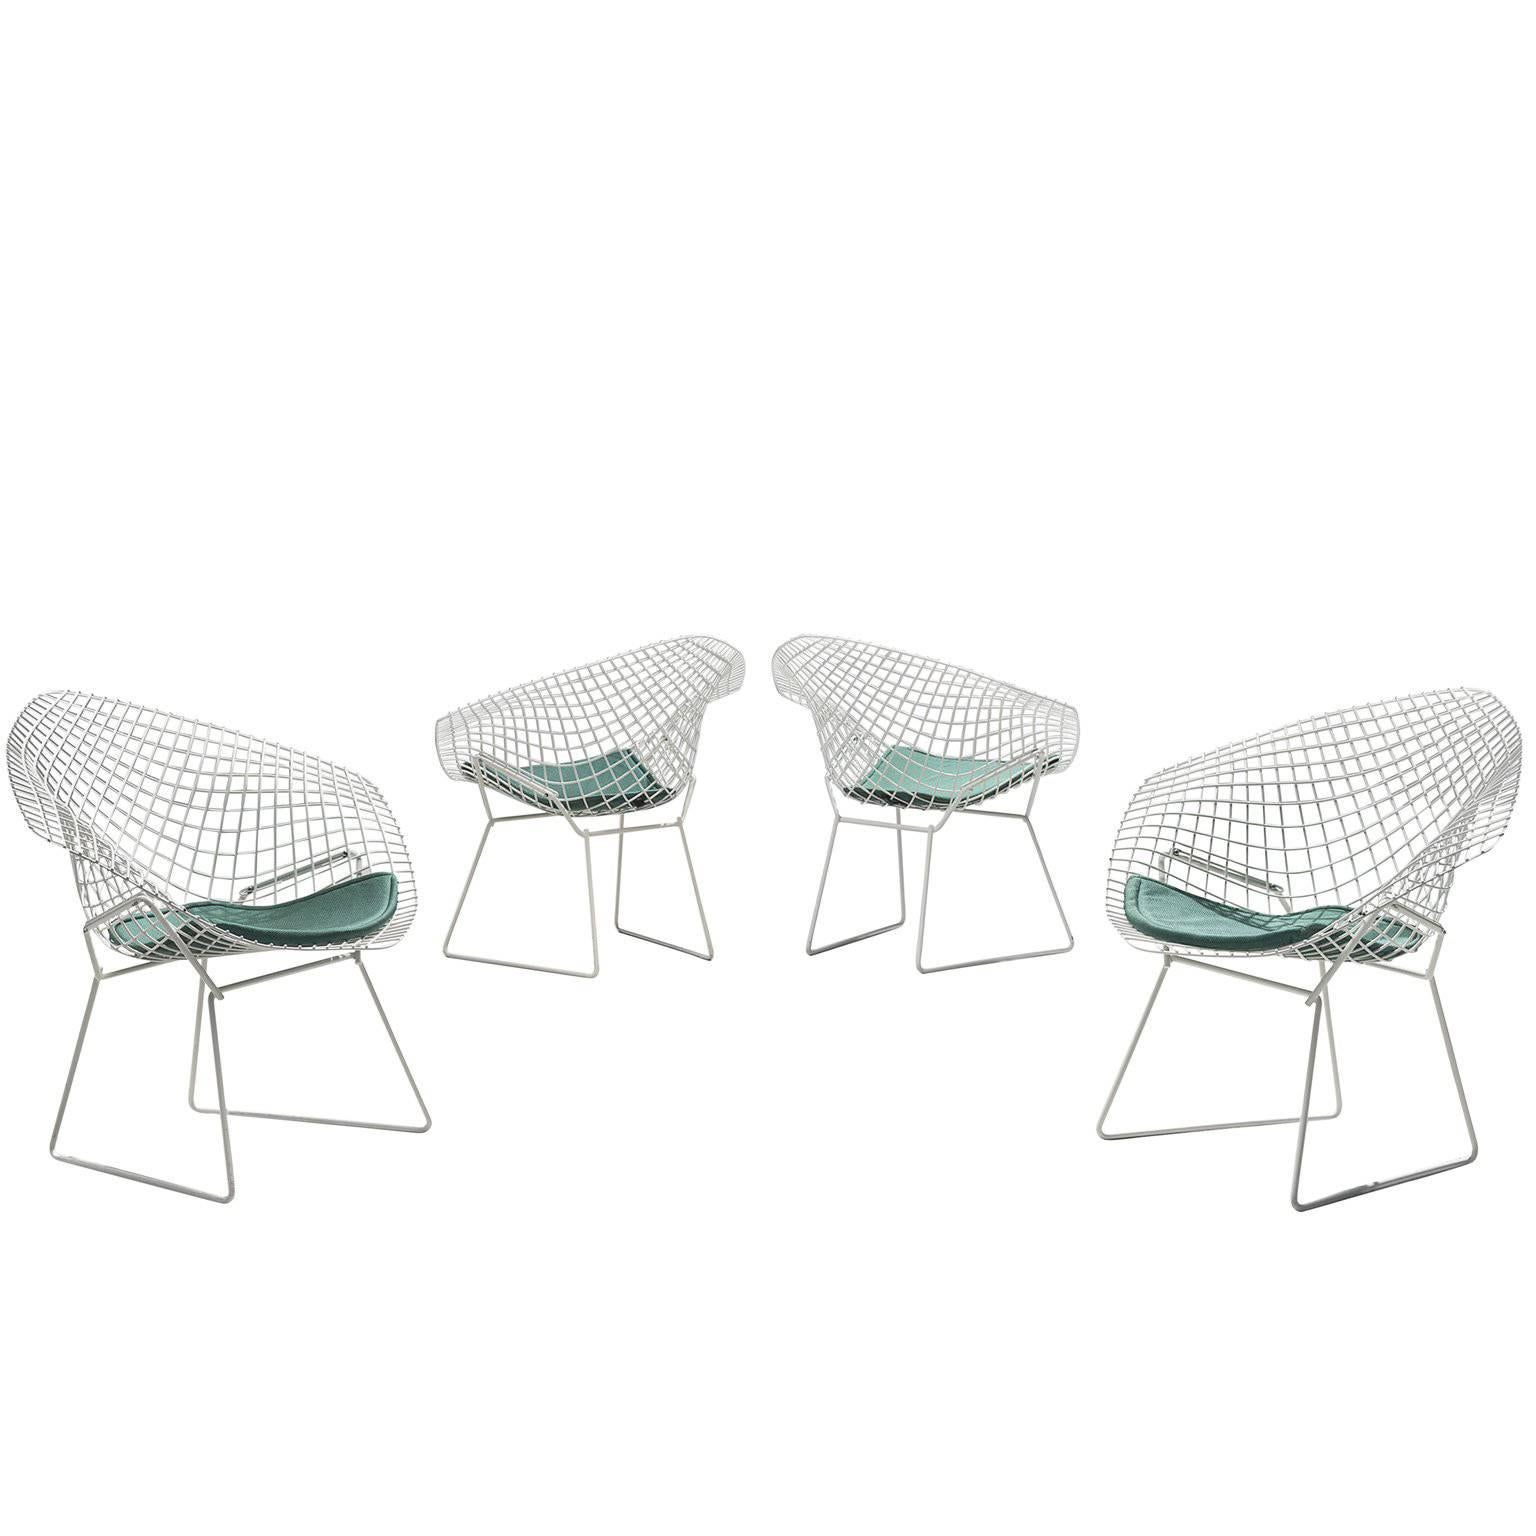 Four 'Diamond' Wire Chairs by Harry Bertoia for Knoll